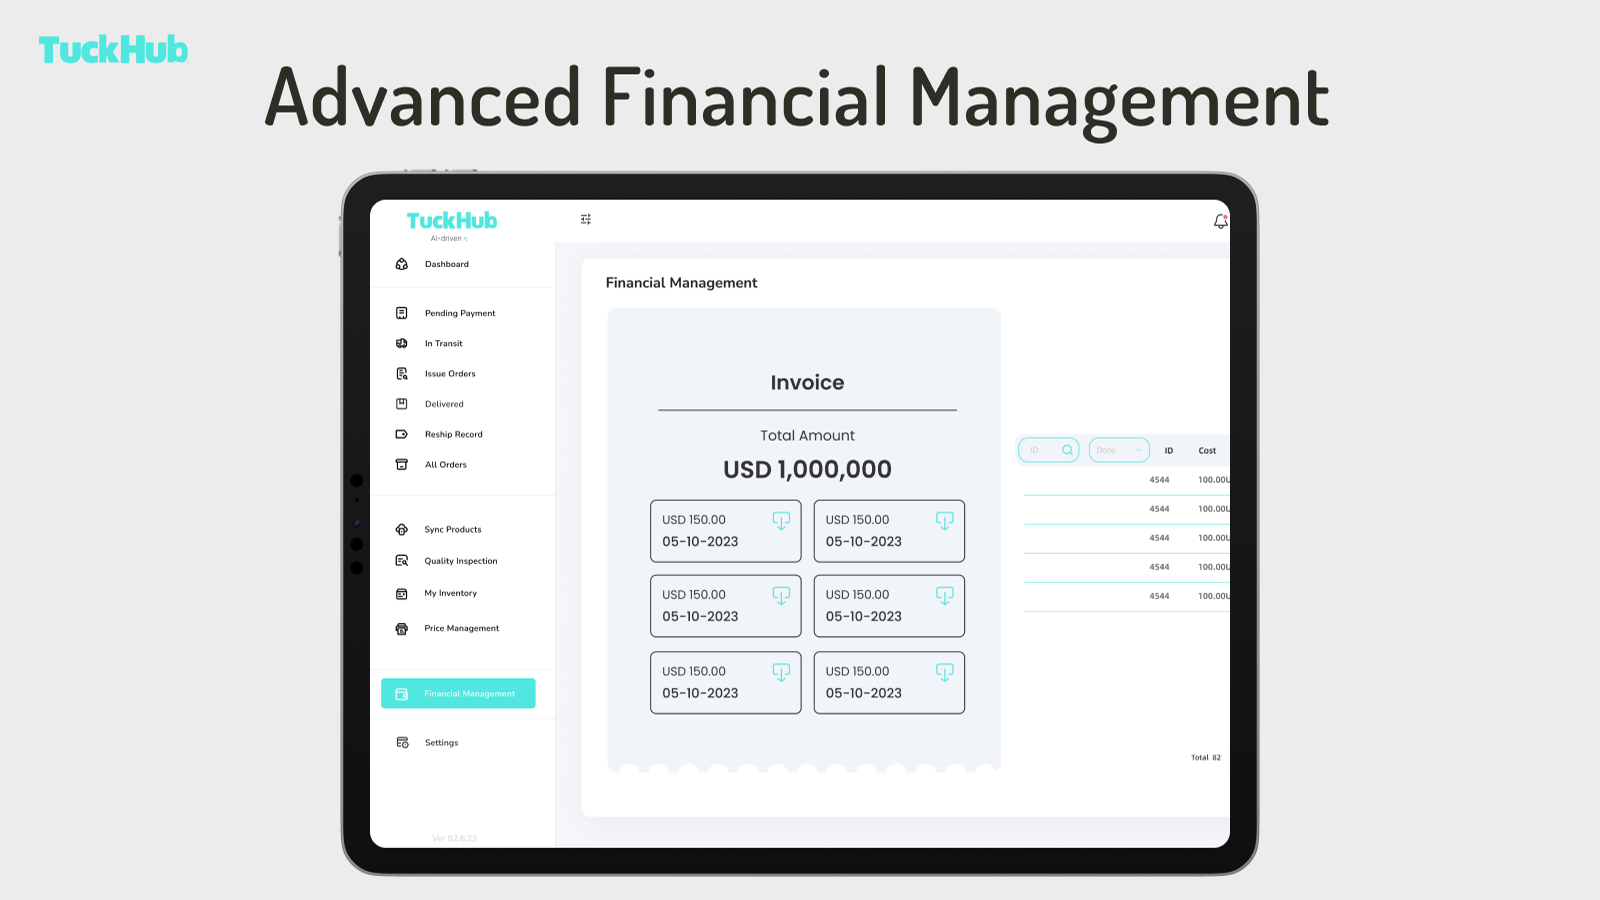 More advanced financial management system